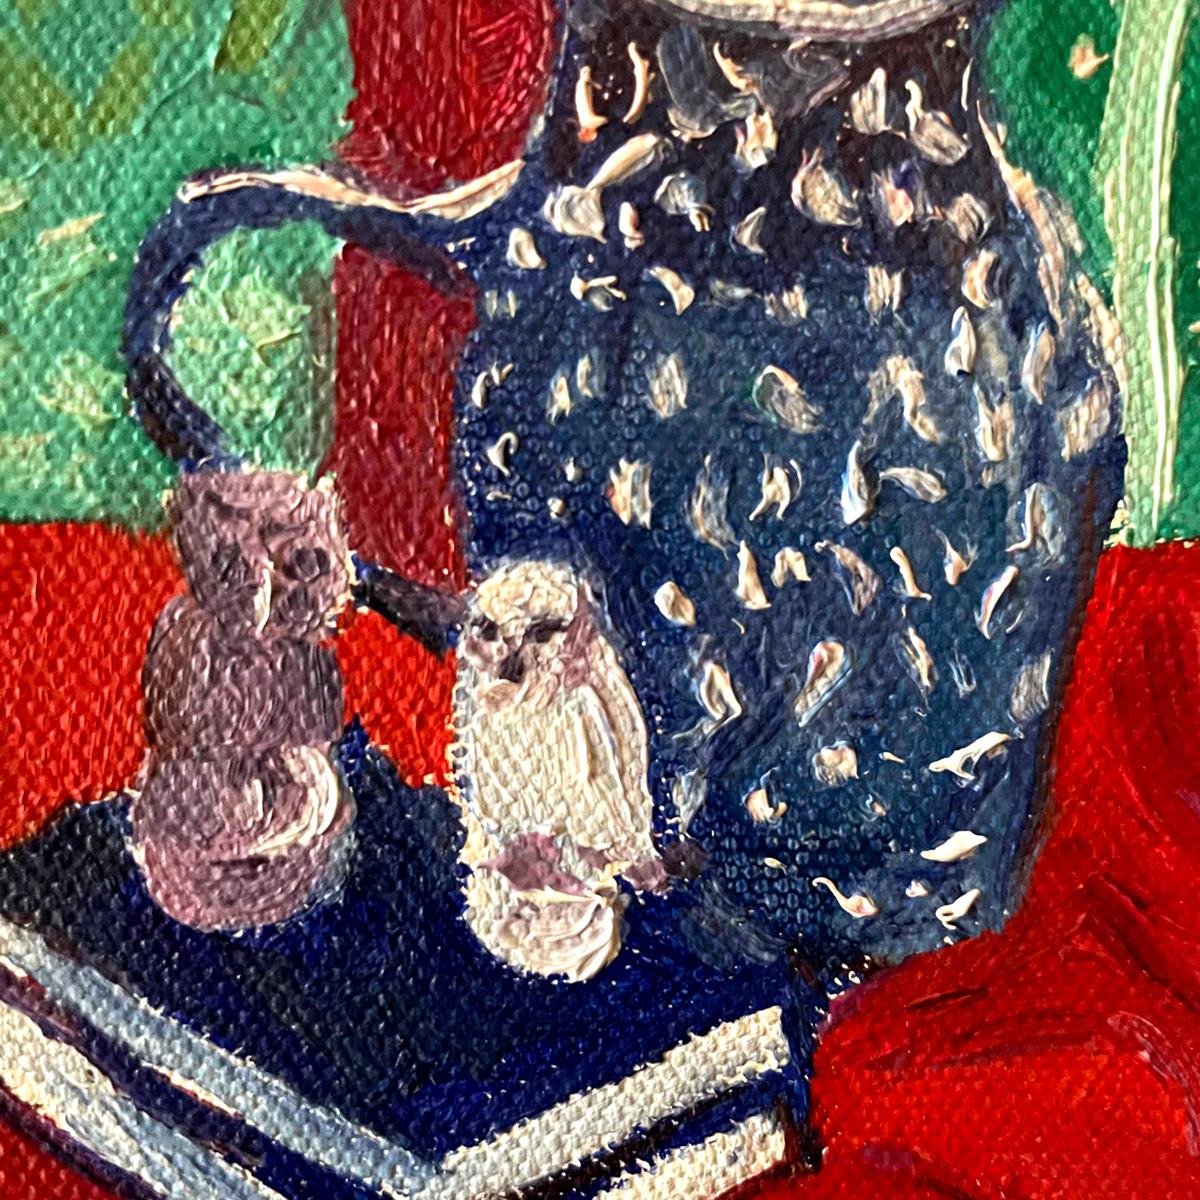 Still Life with Oranges and Owls is an Original Painting by Eleanor Woolley. Painted in the Artist's Gloucestershire Studio this miniature painting shows a still life of a selection of objects arranged by the Artist. Twos stone owls sit atop a stack